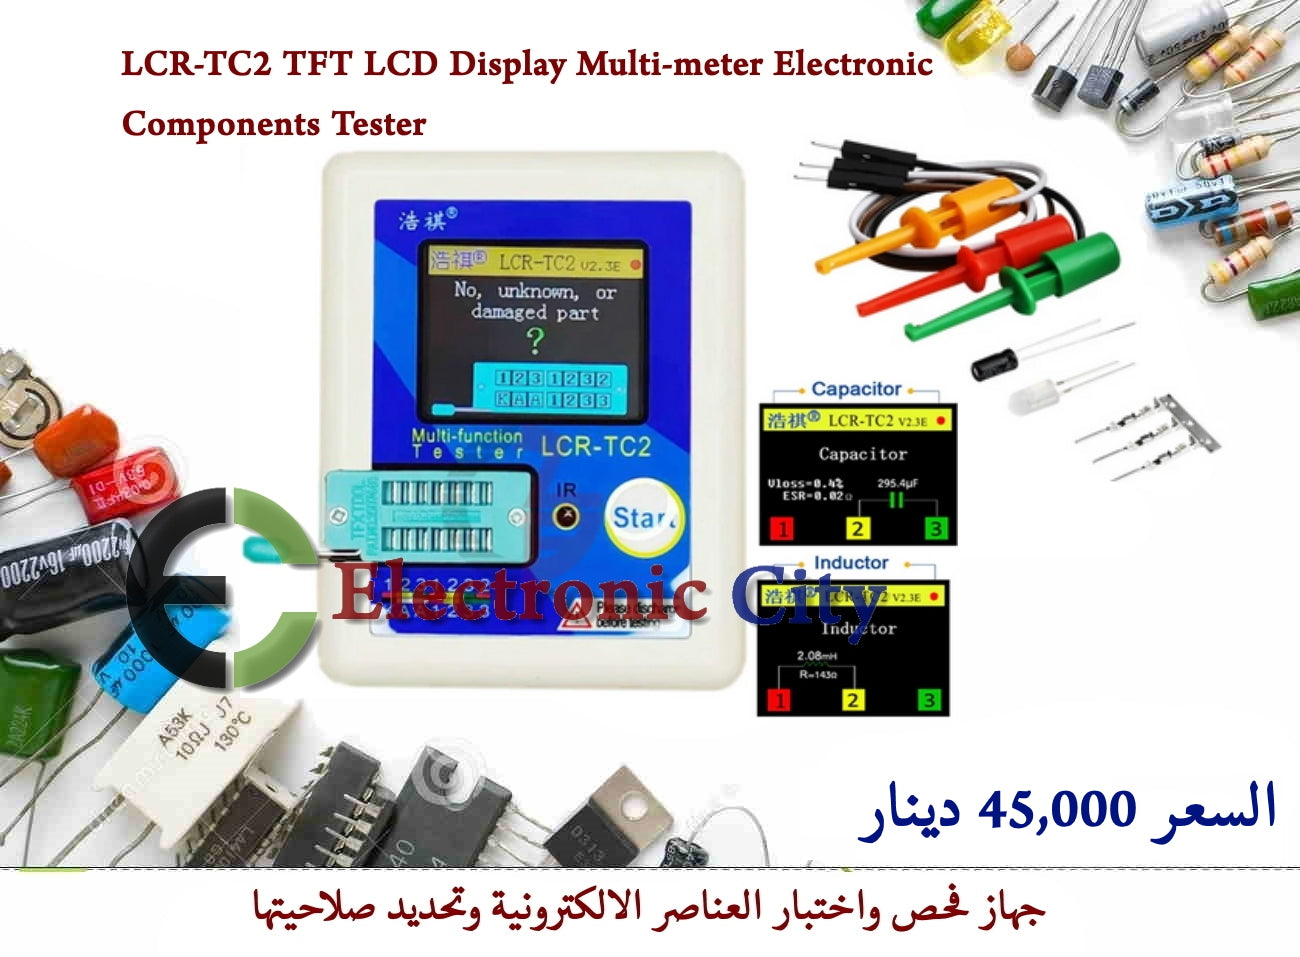 LCR-TC2 TFT LCD Display Multi-meter Electronic Components Tester